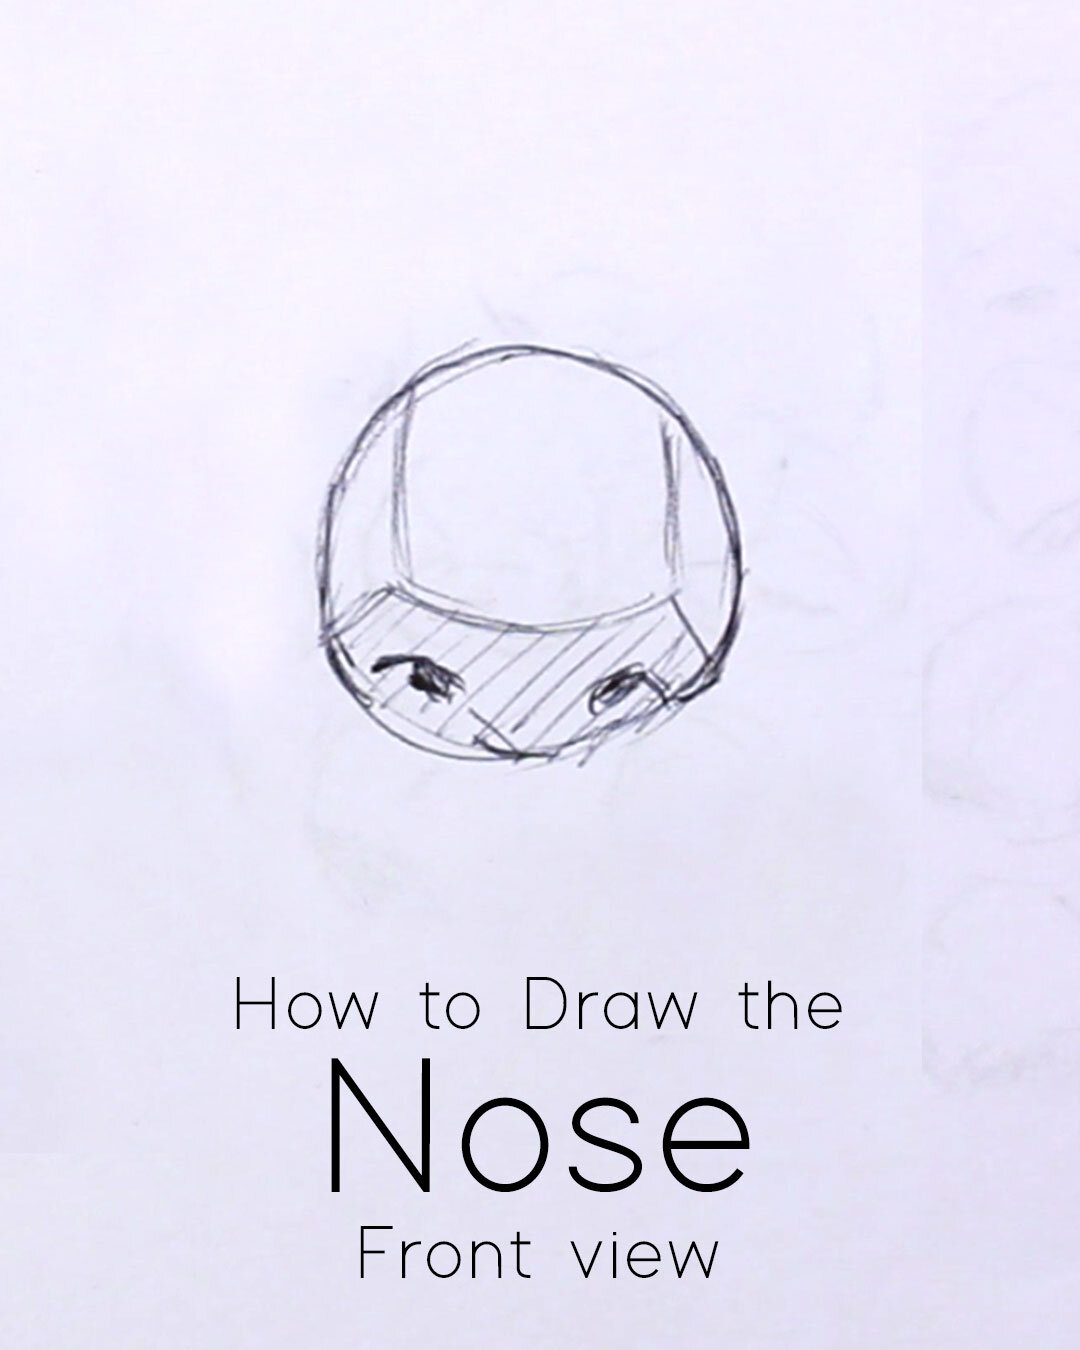 How to Draw a Nose from front view without Shading Step 1 &amp; 2 #anatomy #nose #drawing #arttutorial